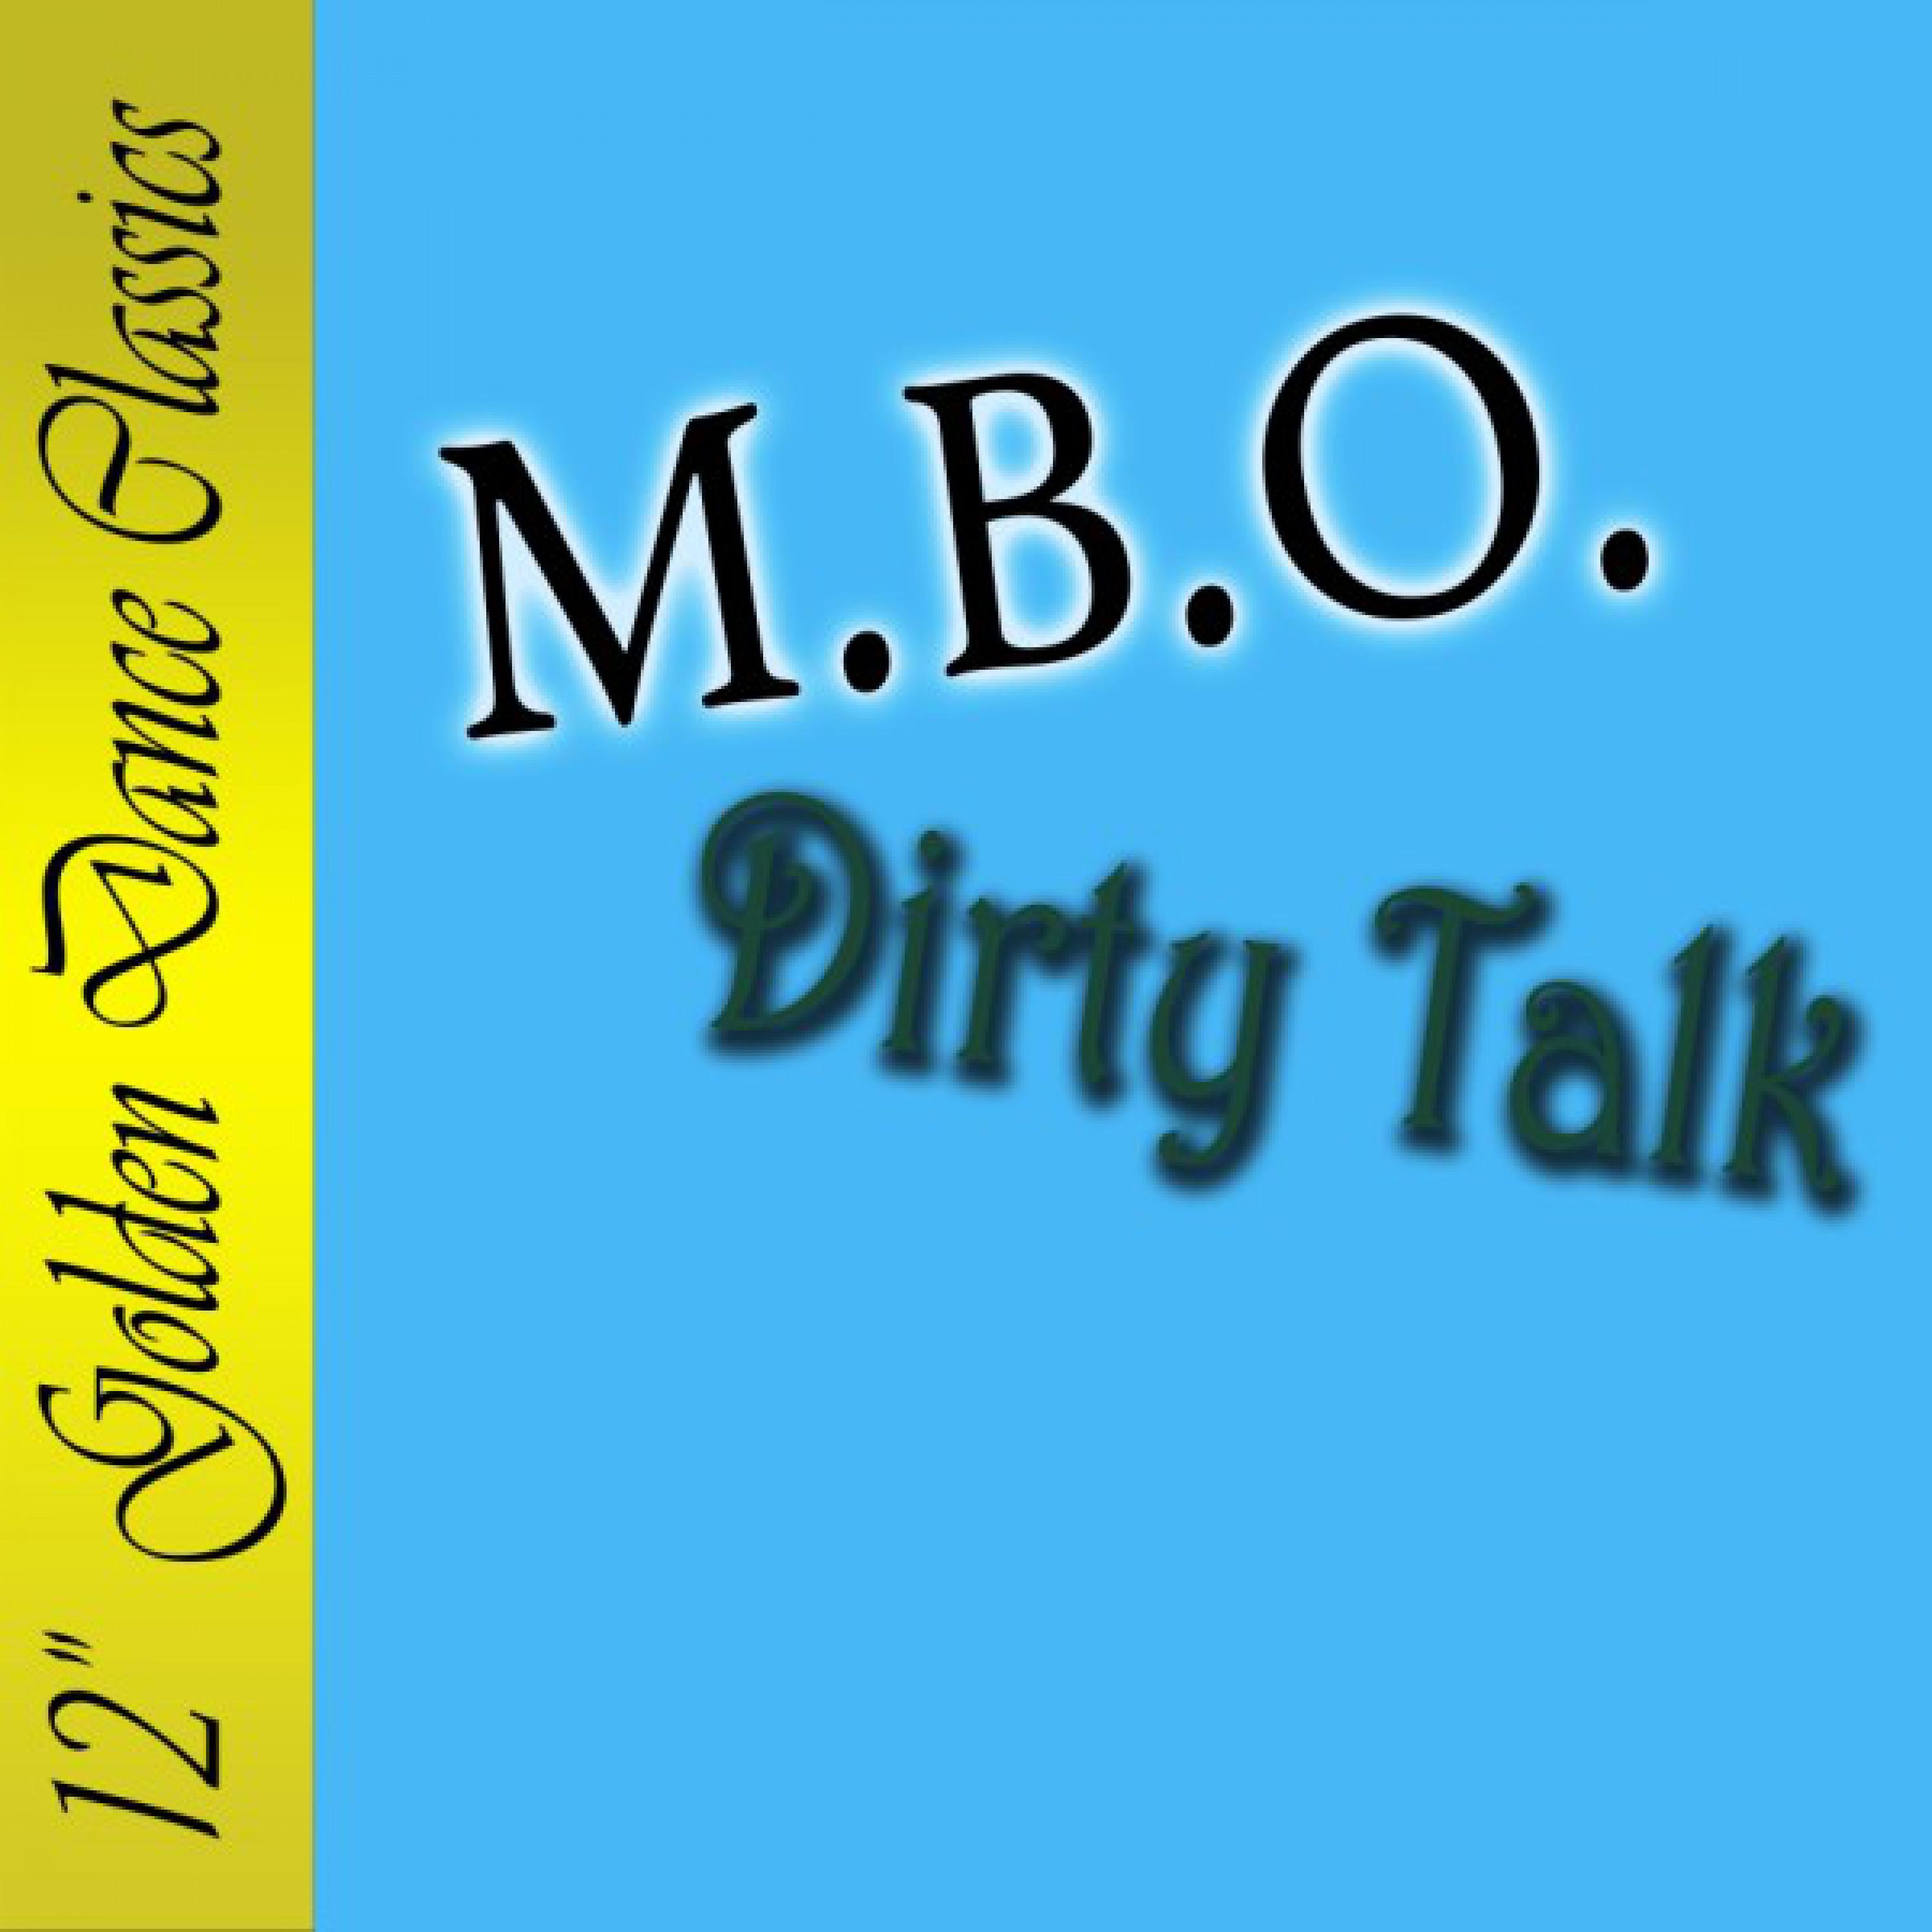 Dirty Talk "2002" (Extended Version)